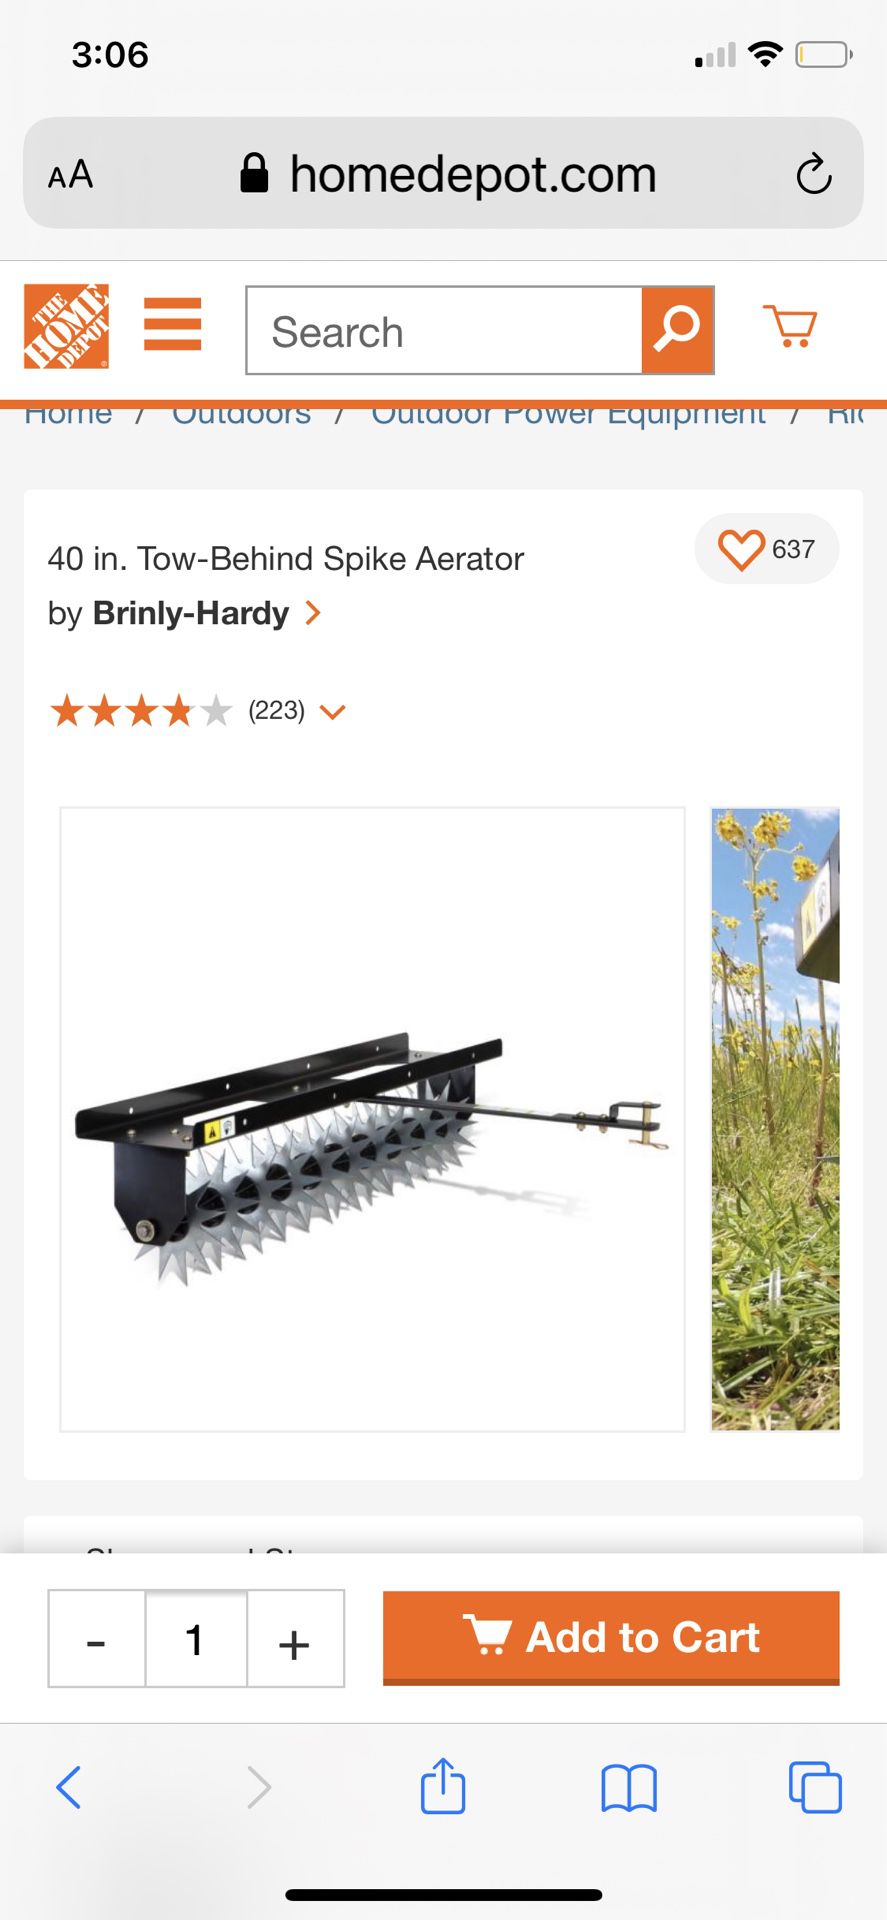 New Brinly-Hardy Tow-Behind Spike Aerator — 40in.W, Model# SA-400BH